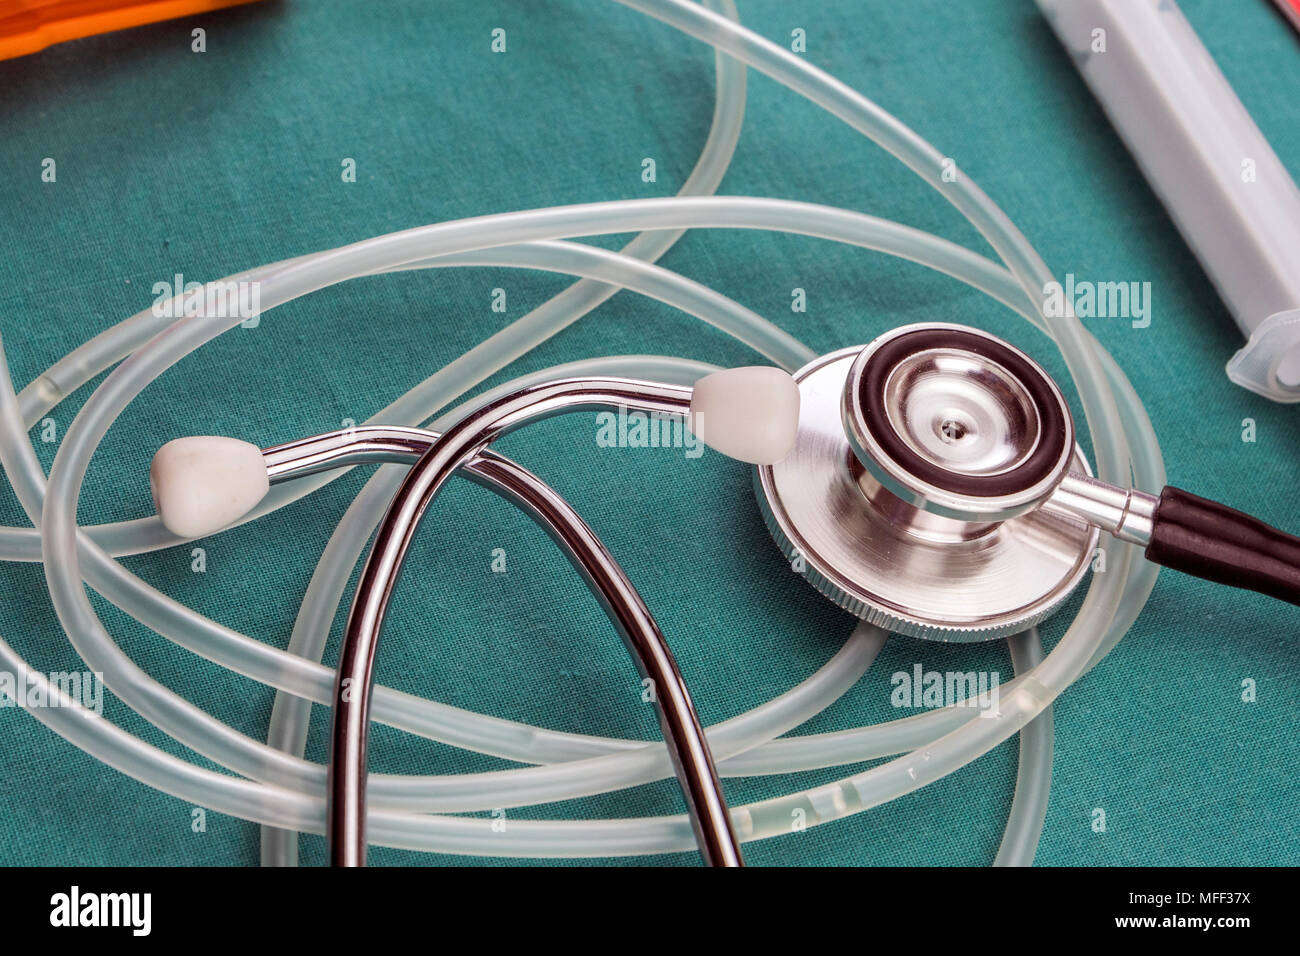 Drip Irrigation Equipment For Injecting Together With A Stethoscope, Conceptual image Stock Photo